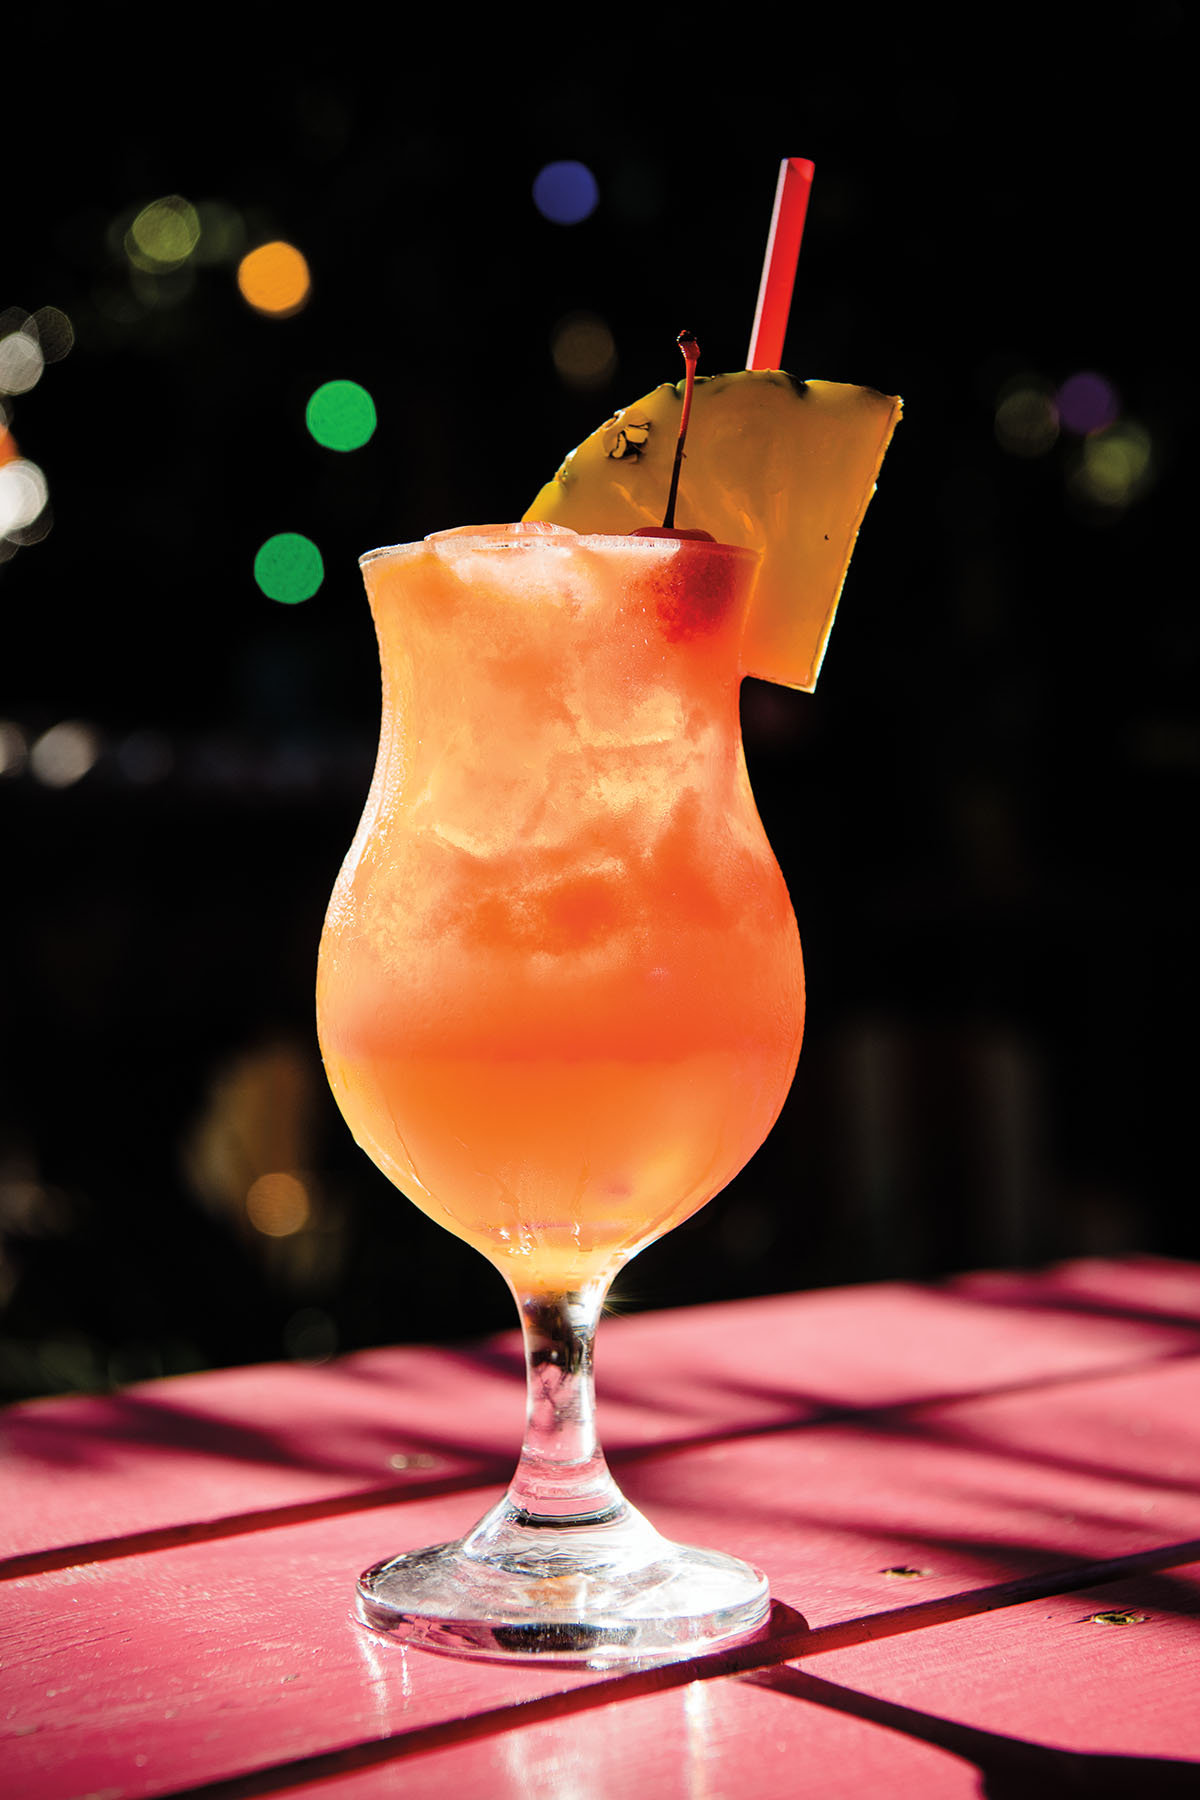 A glass of bright orangey-peach rum punch with a pineapple wedge on the side